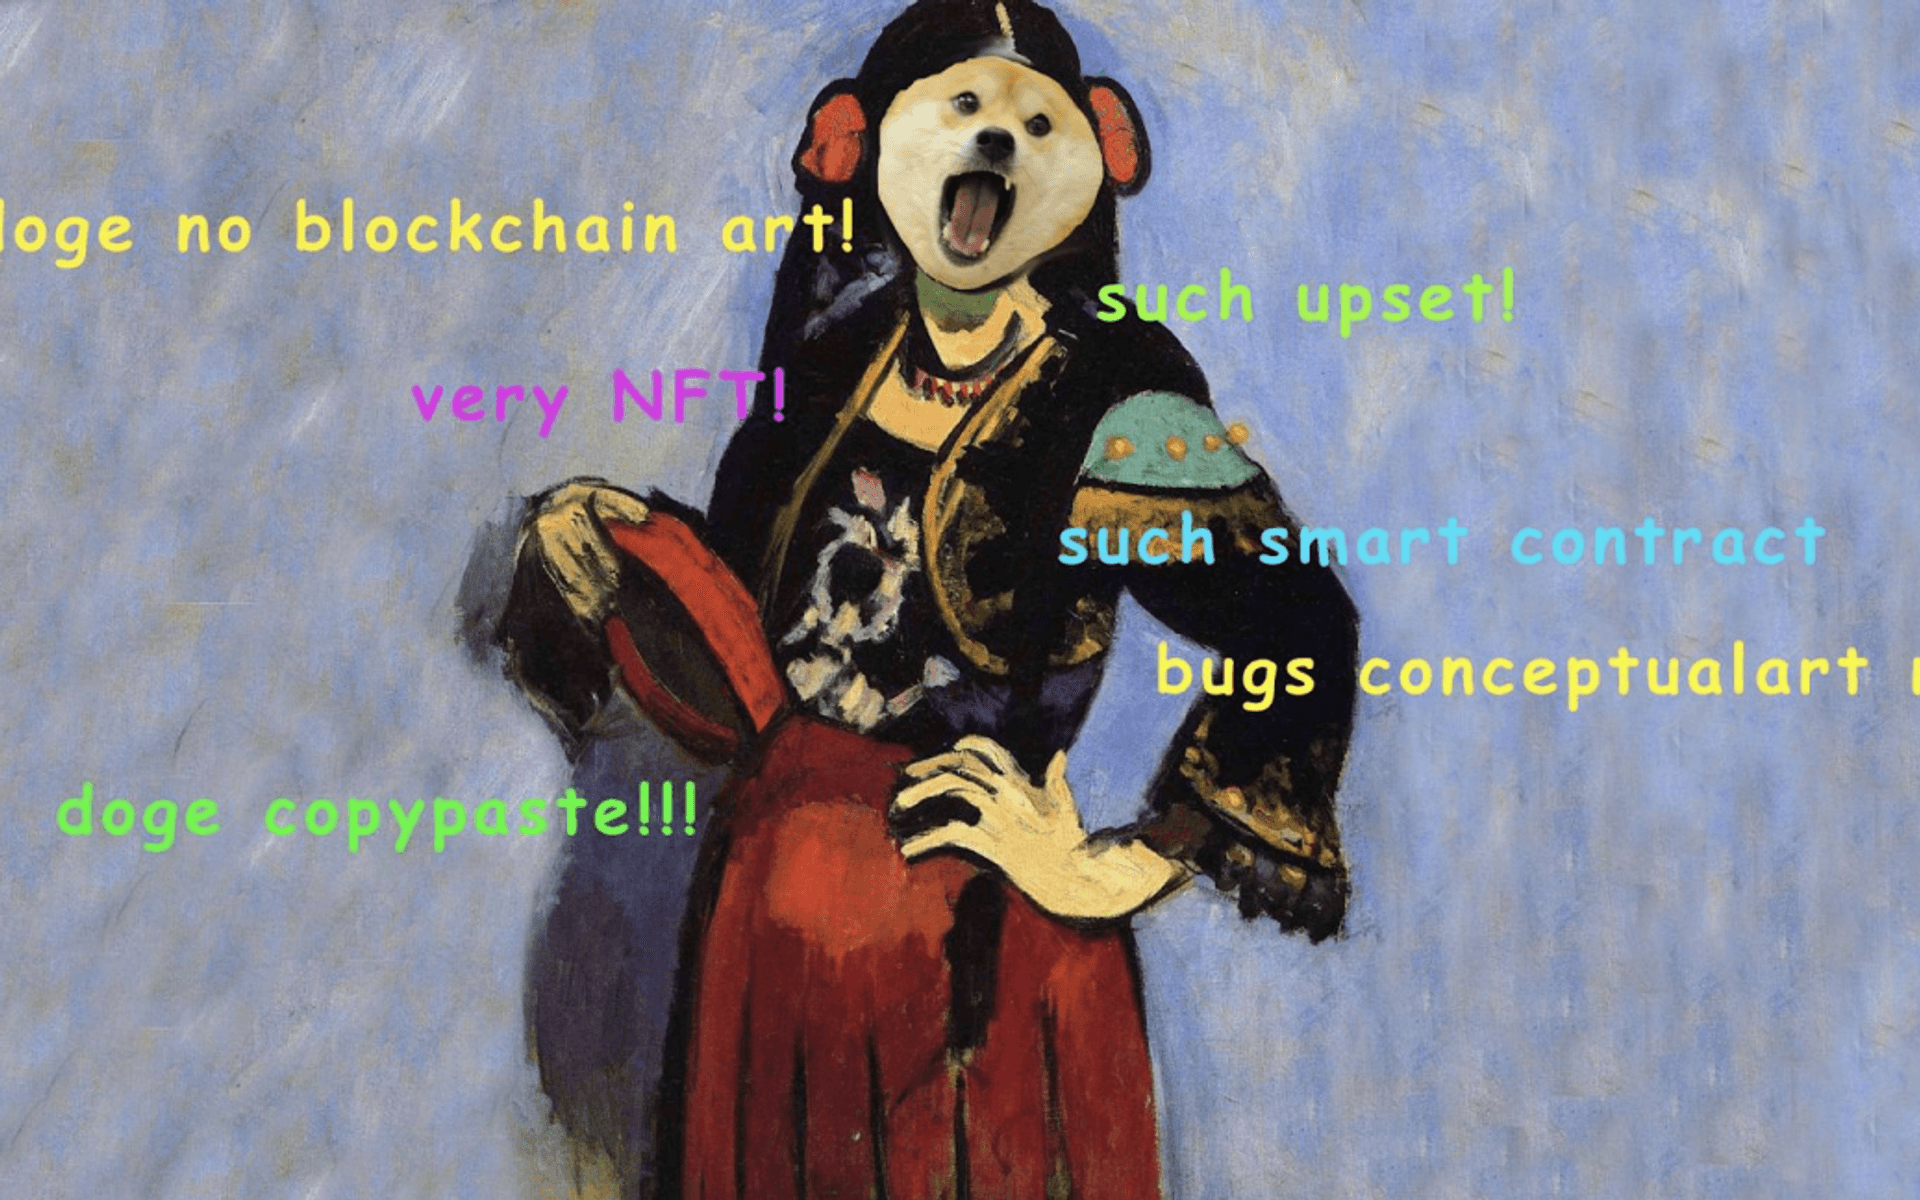 There is no such thing as blockchain art